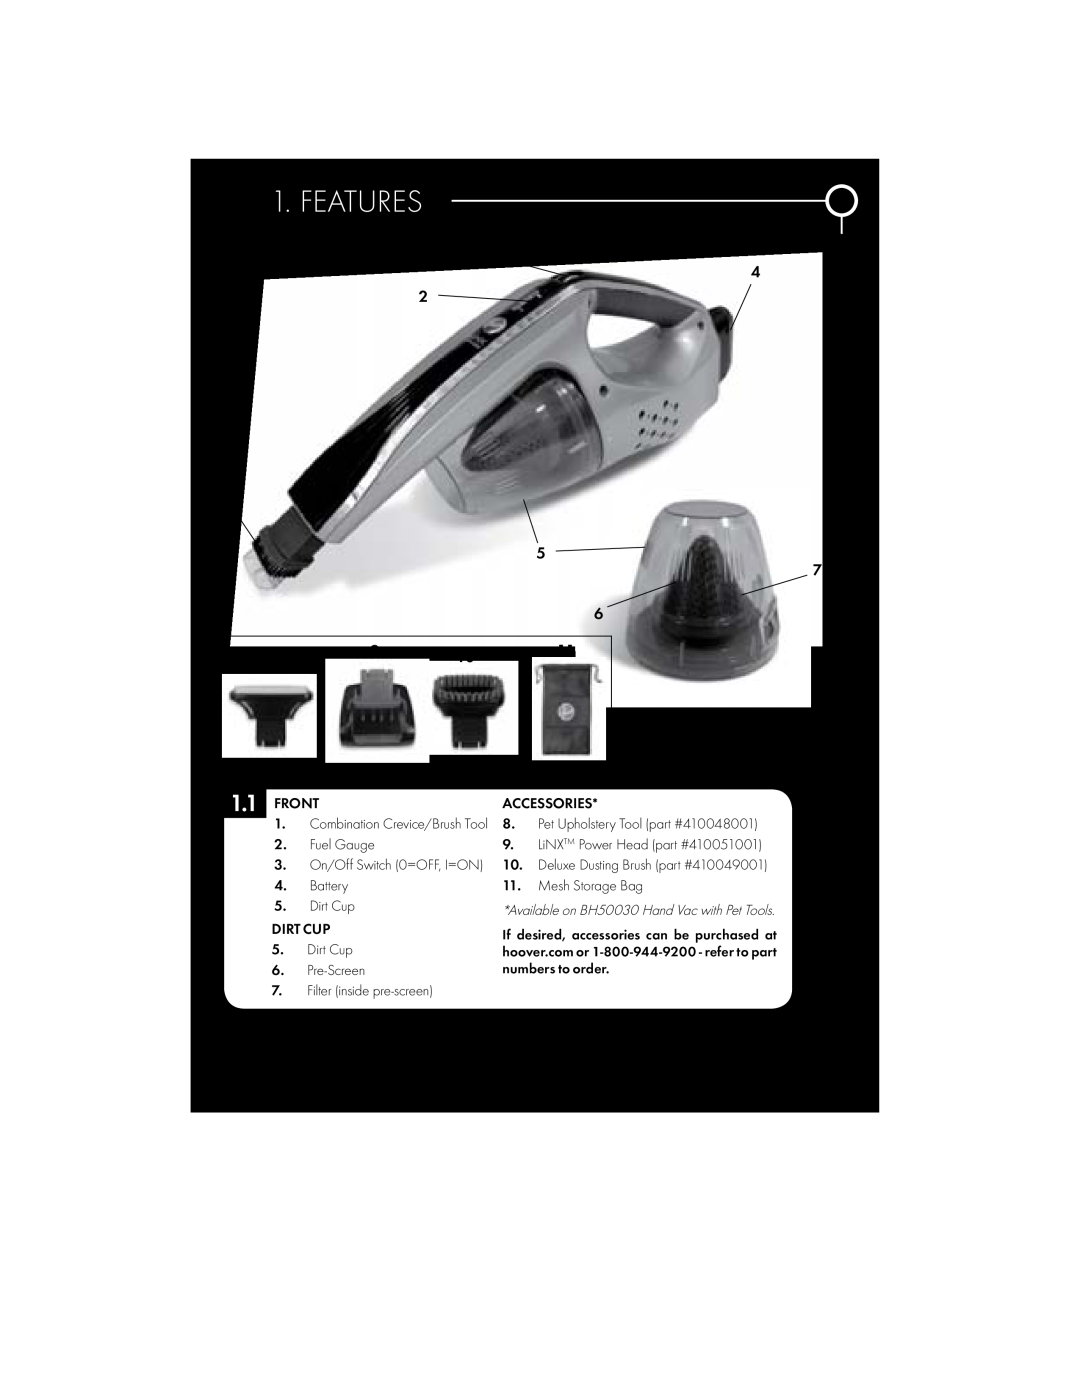 Hoover BH50035, BH50015 owner manual Features, Available on BH50030 Hand Vac with Pet Tools 